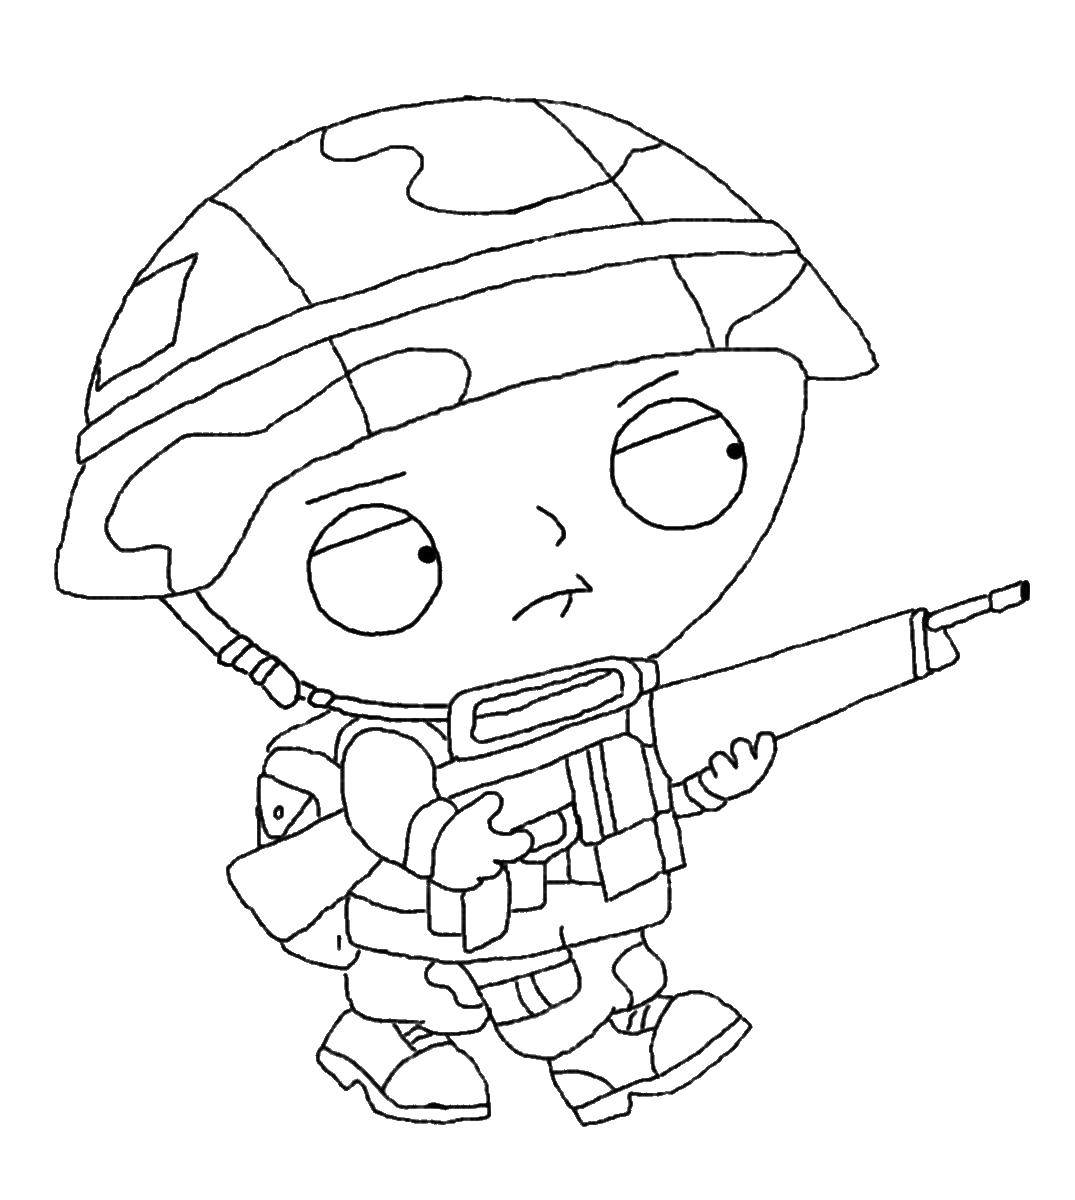 Coloring Stewie soldiers. Category Cartoon character. Tags:  Family guy cartoon.